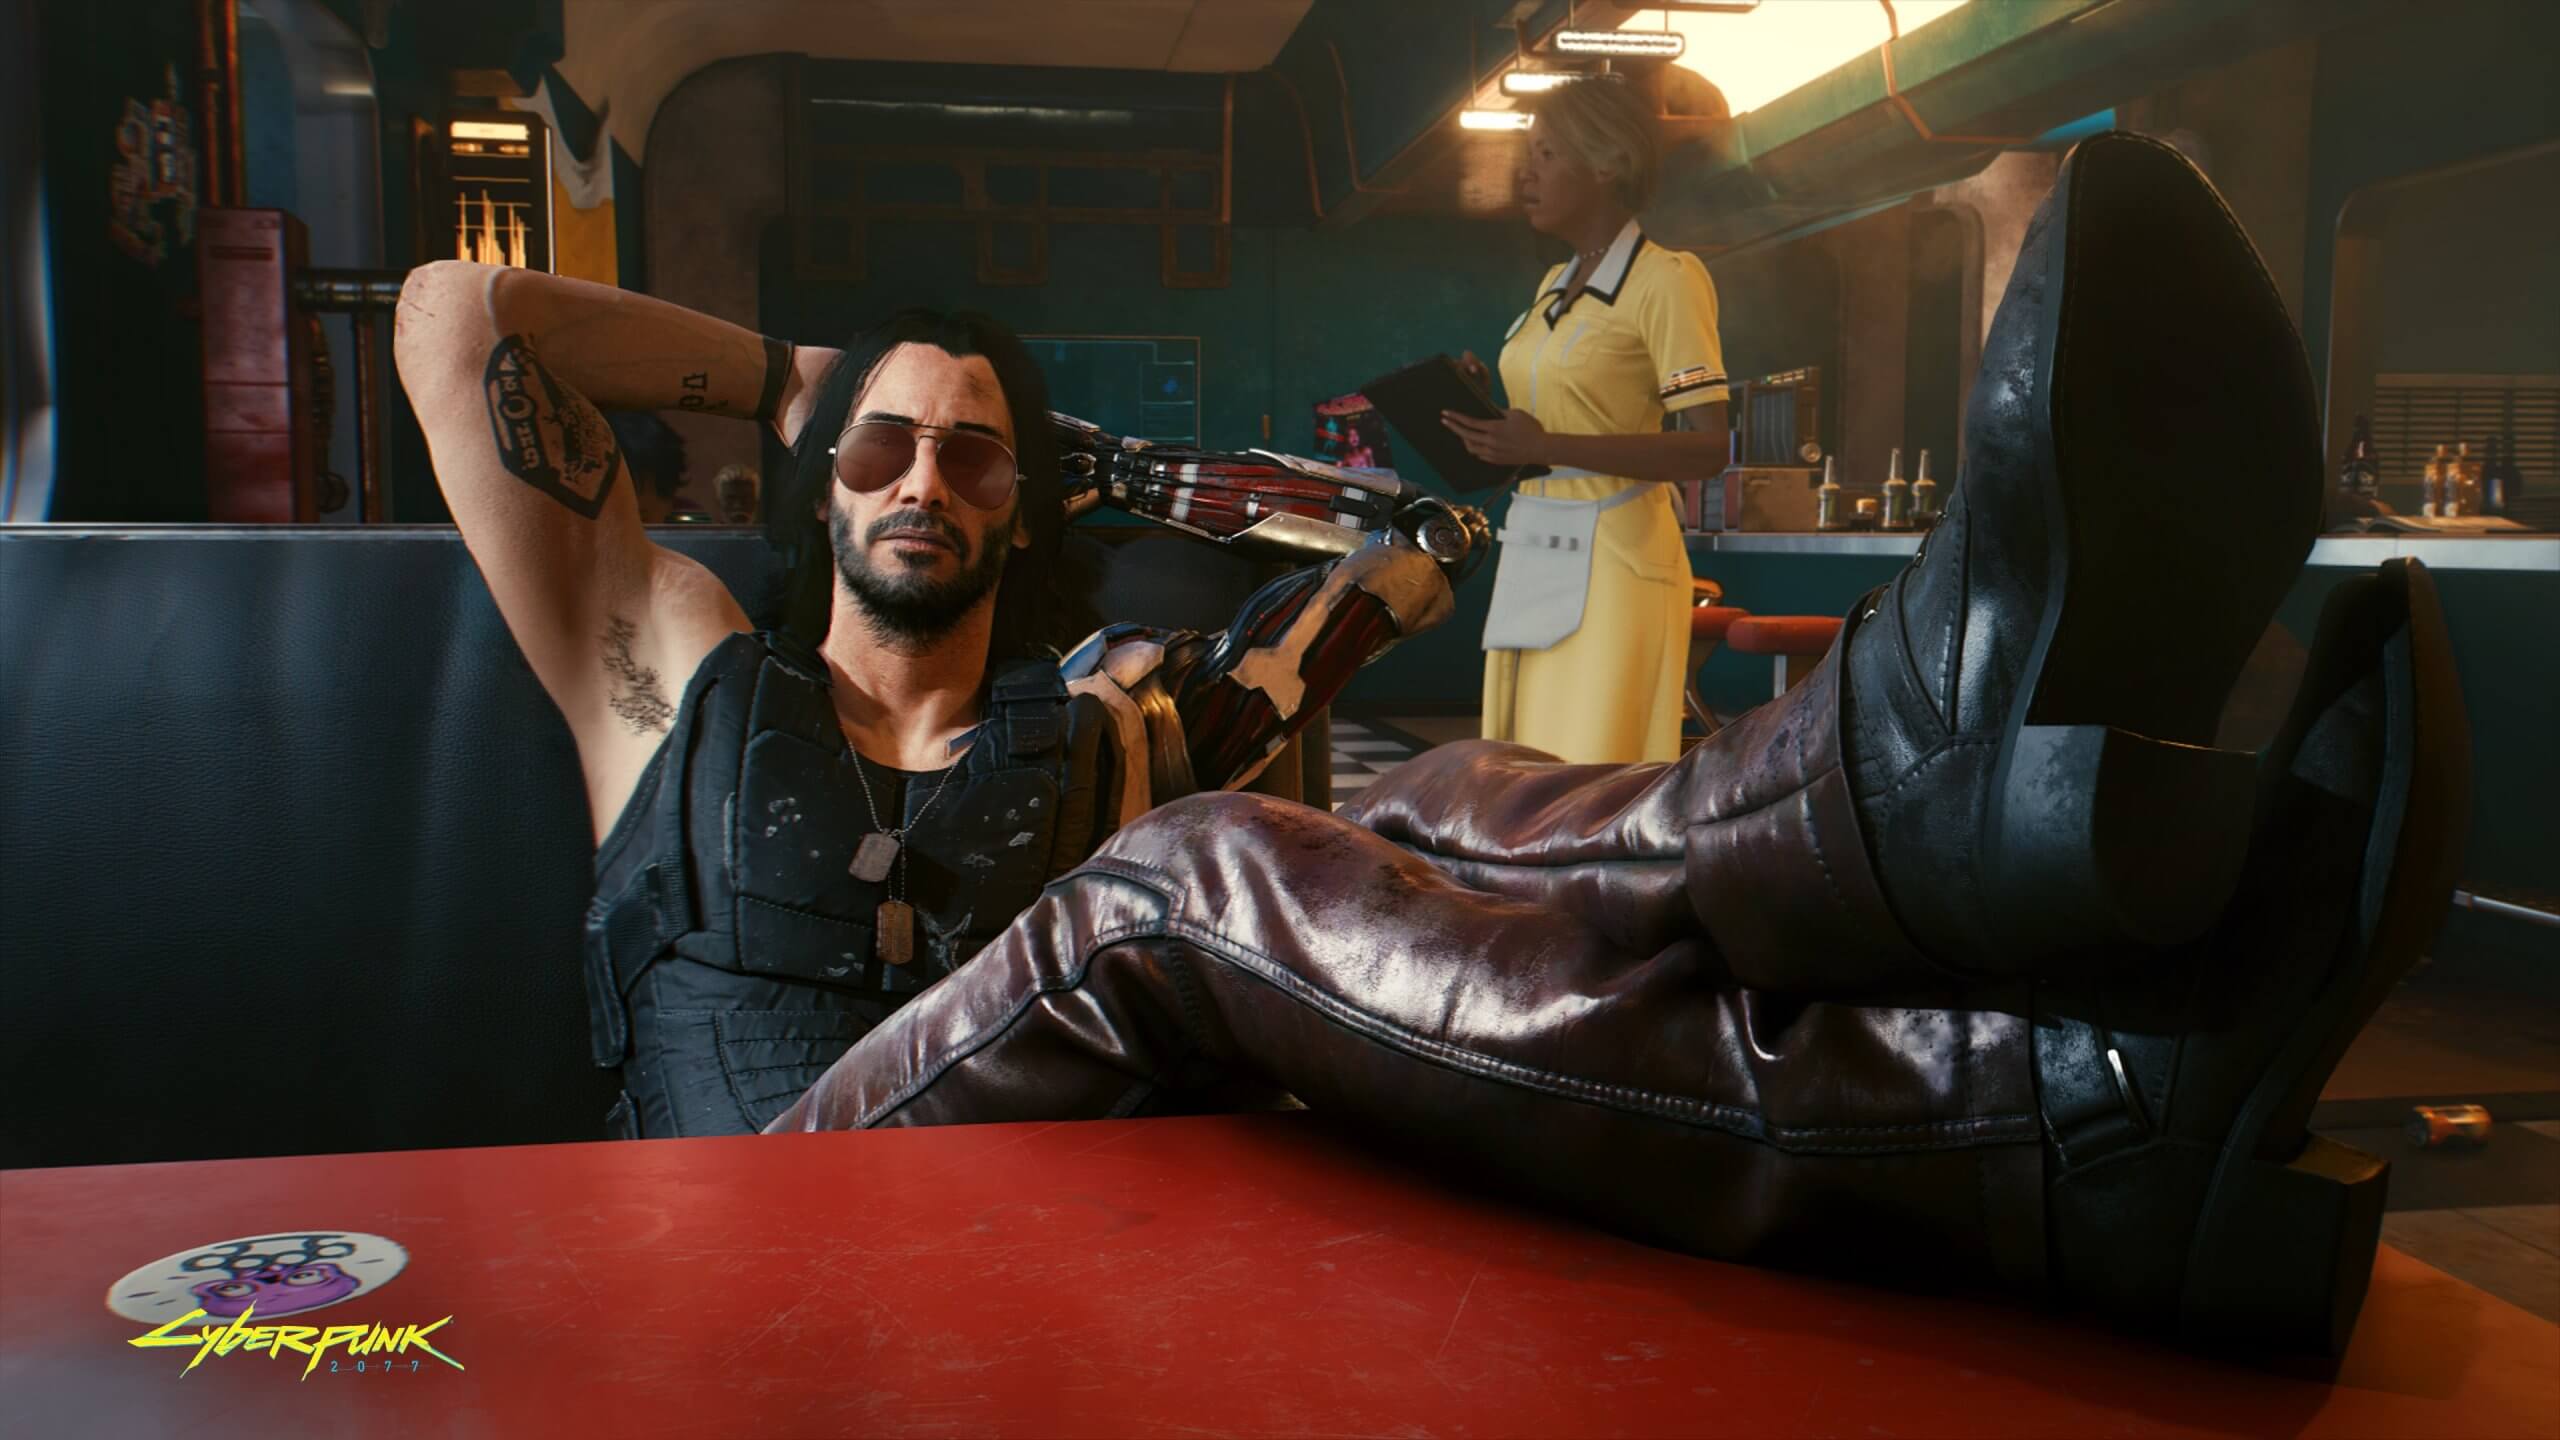 Cyberpunk 2077 has over one million concurrent players on Steam in just